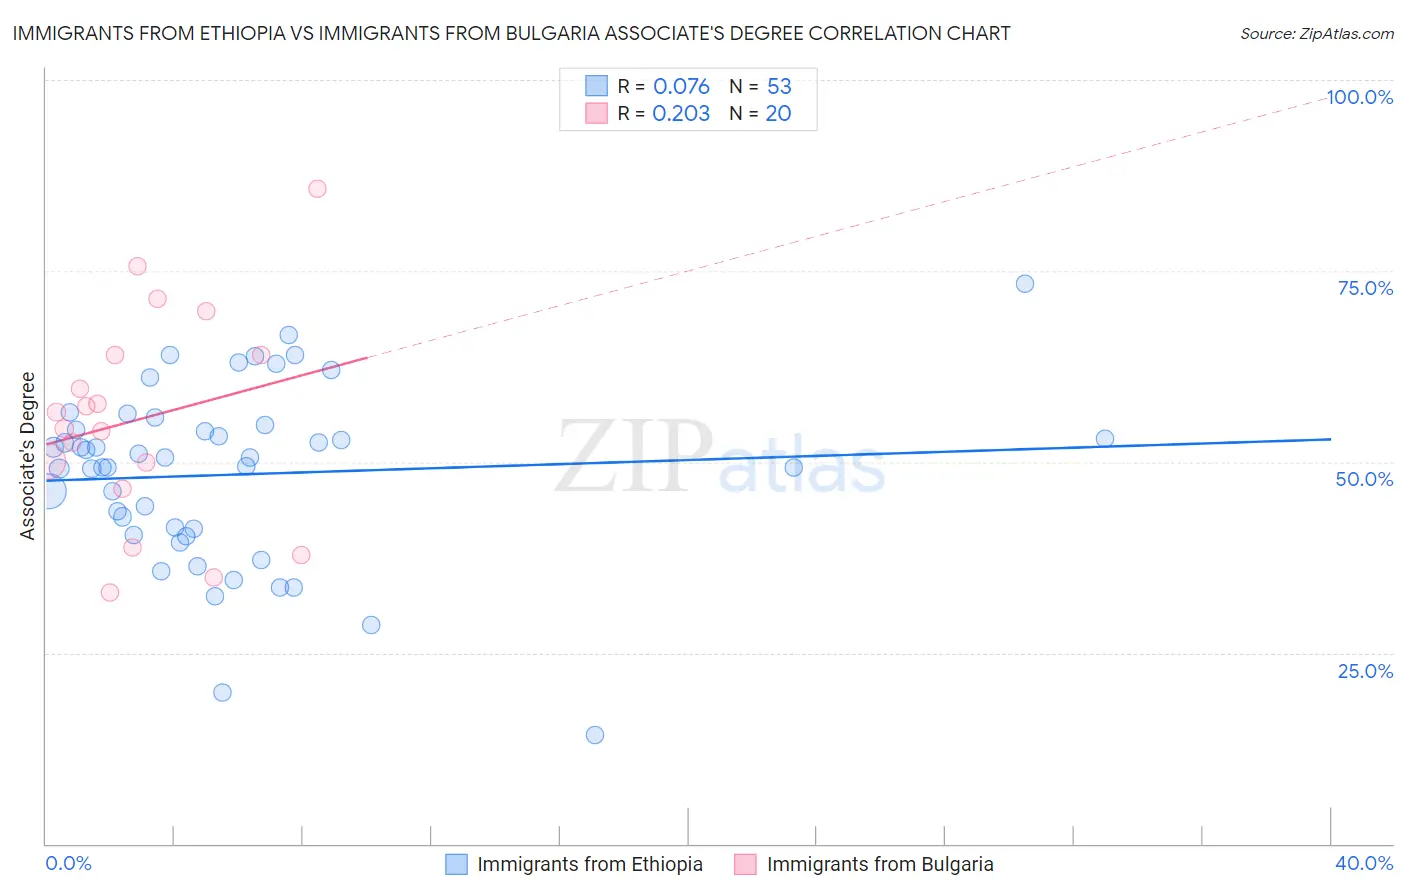 Immigrants from Ethiopia vs Immigrants from Bulgaria Associate's Degree